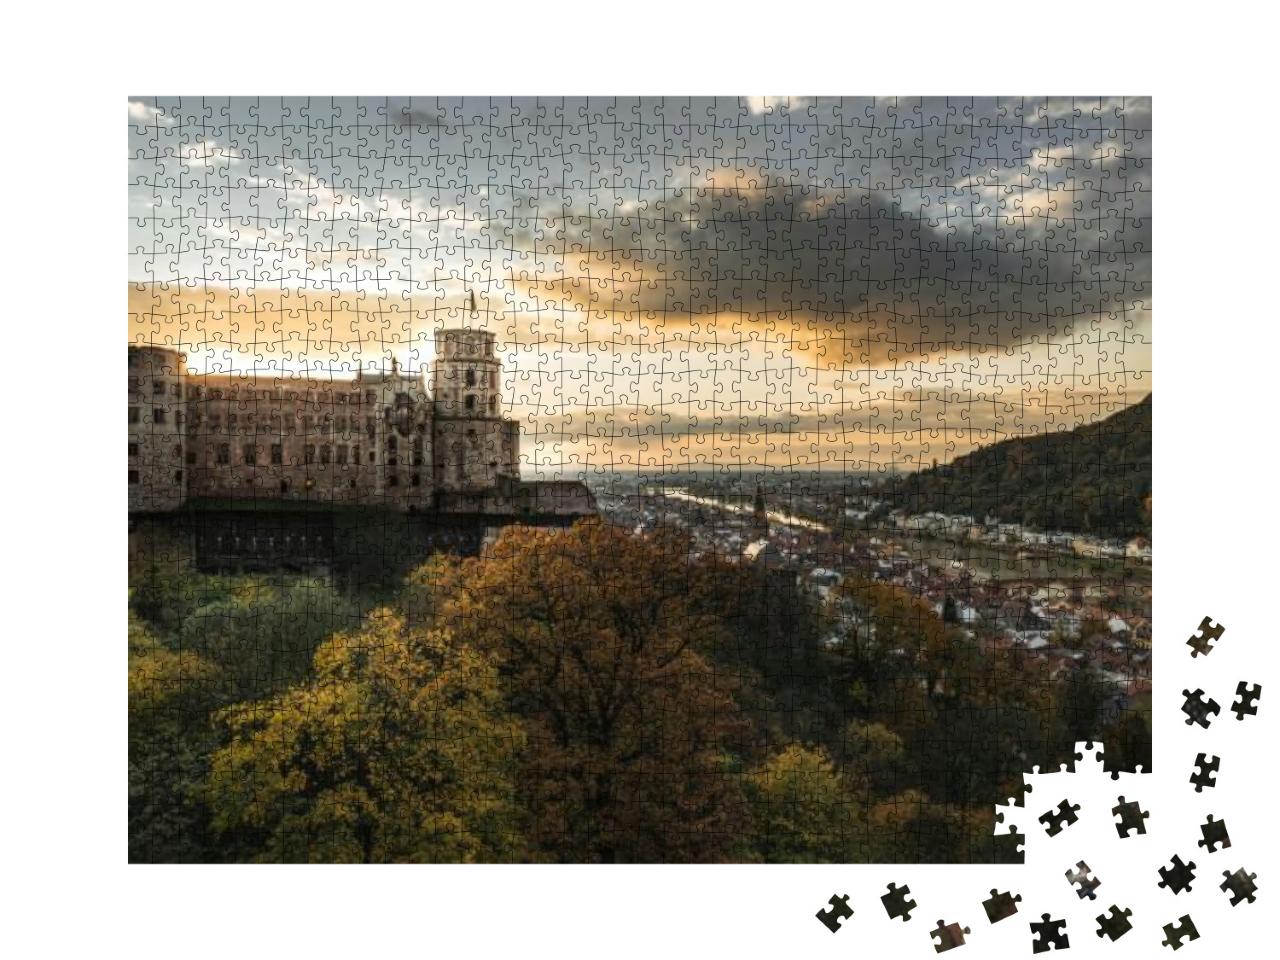 The Beautiful Castle & Old Town of Heidelberg During Fall... Jigsaw Puzzle with 1000 pieces